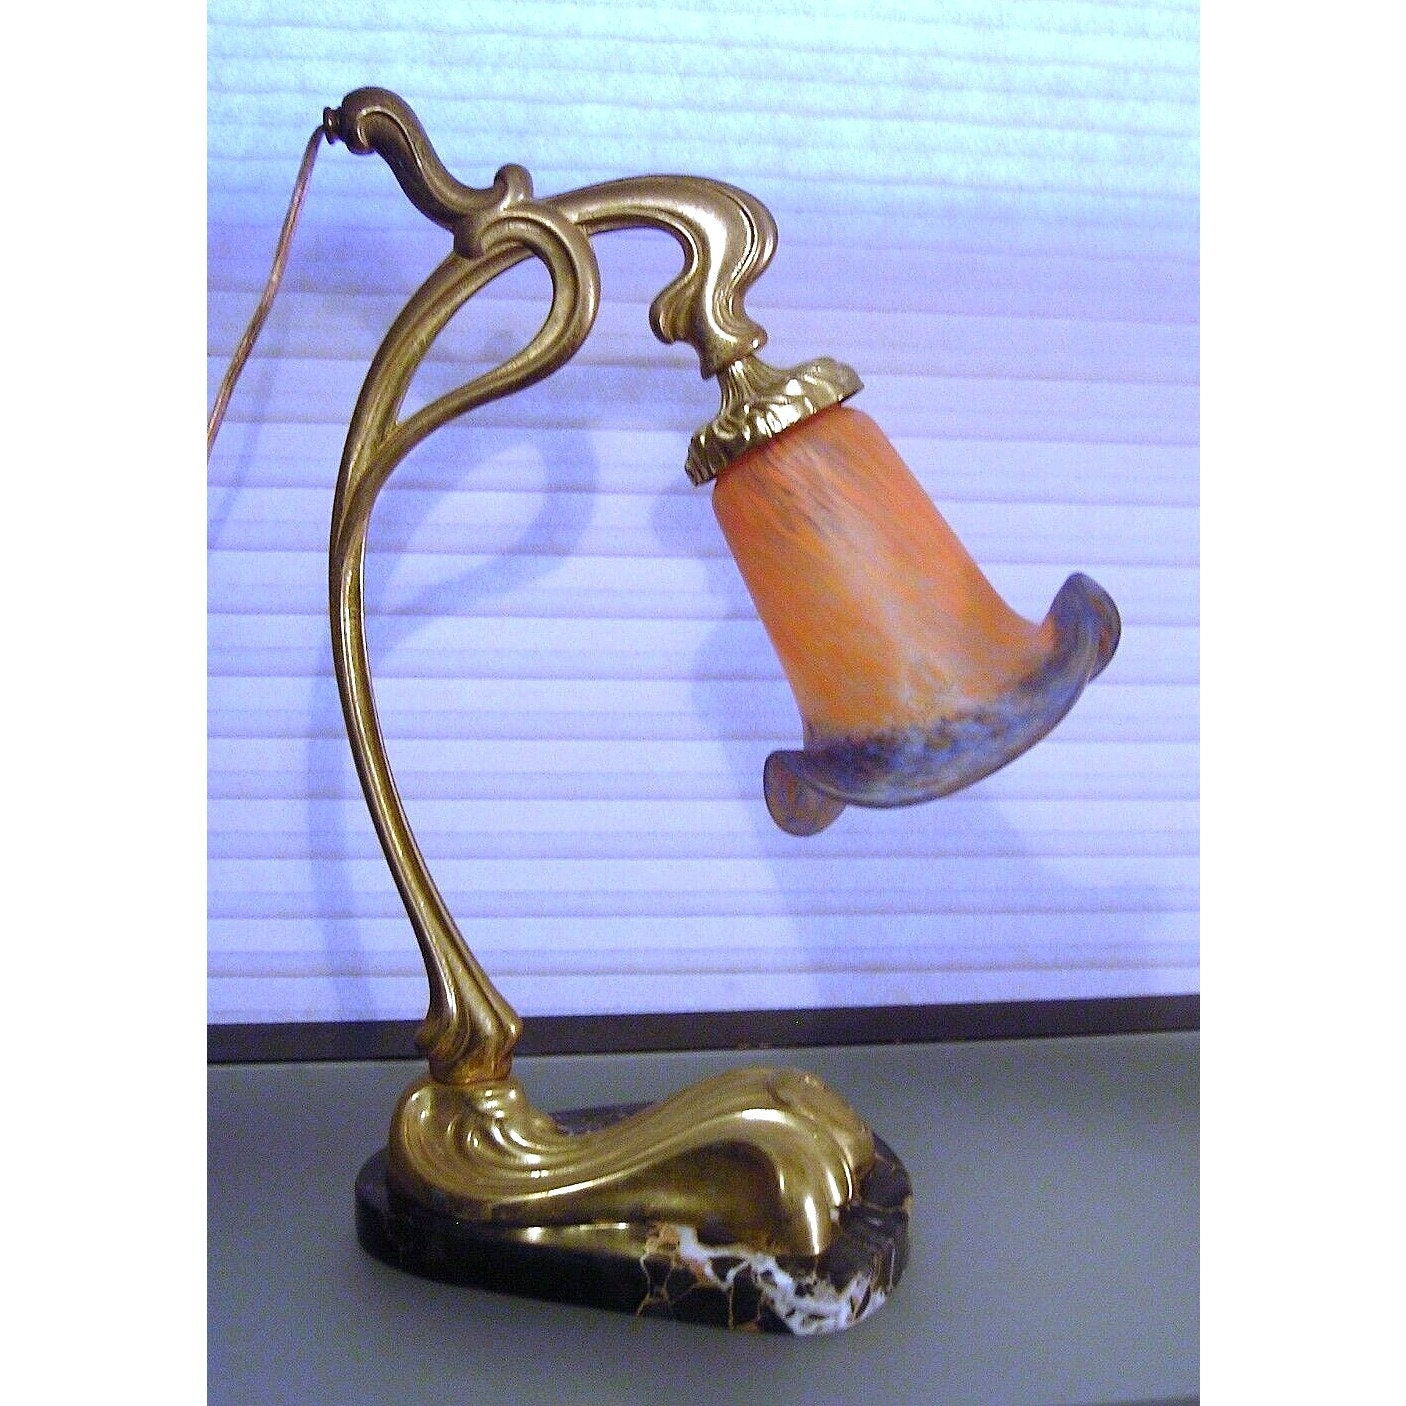 Vintage Ott-lite Magnifying Art & Crafts / Sewing Lamp With Swivel